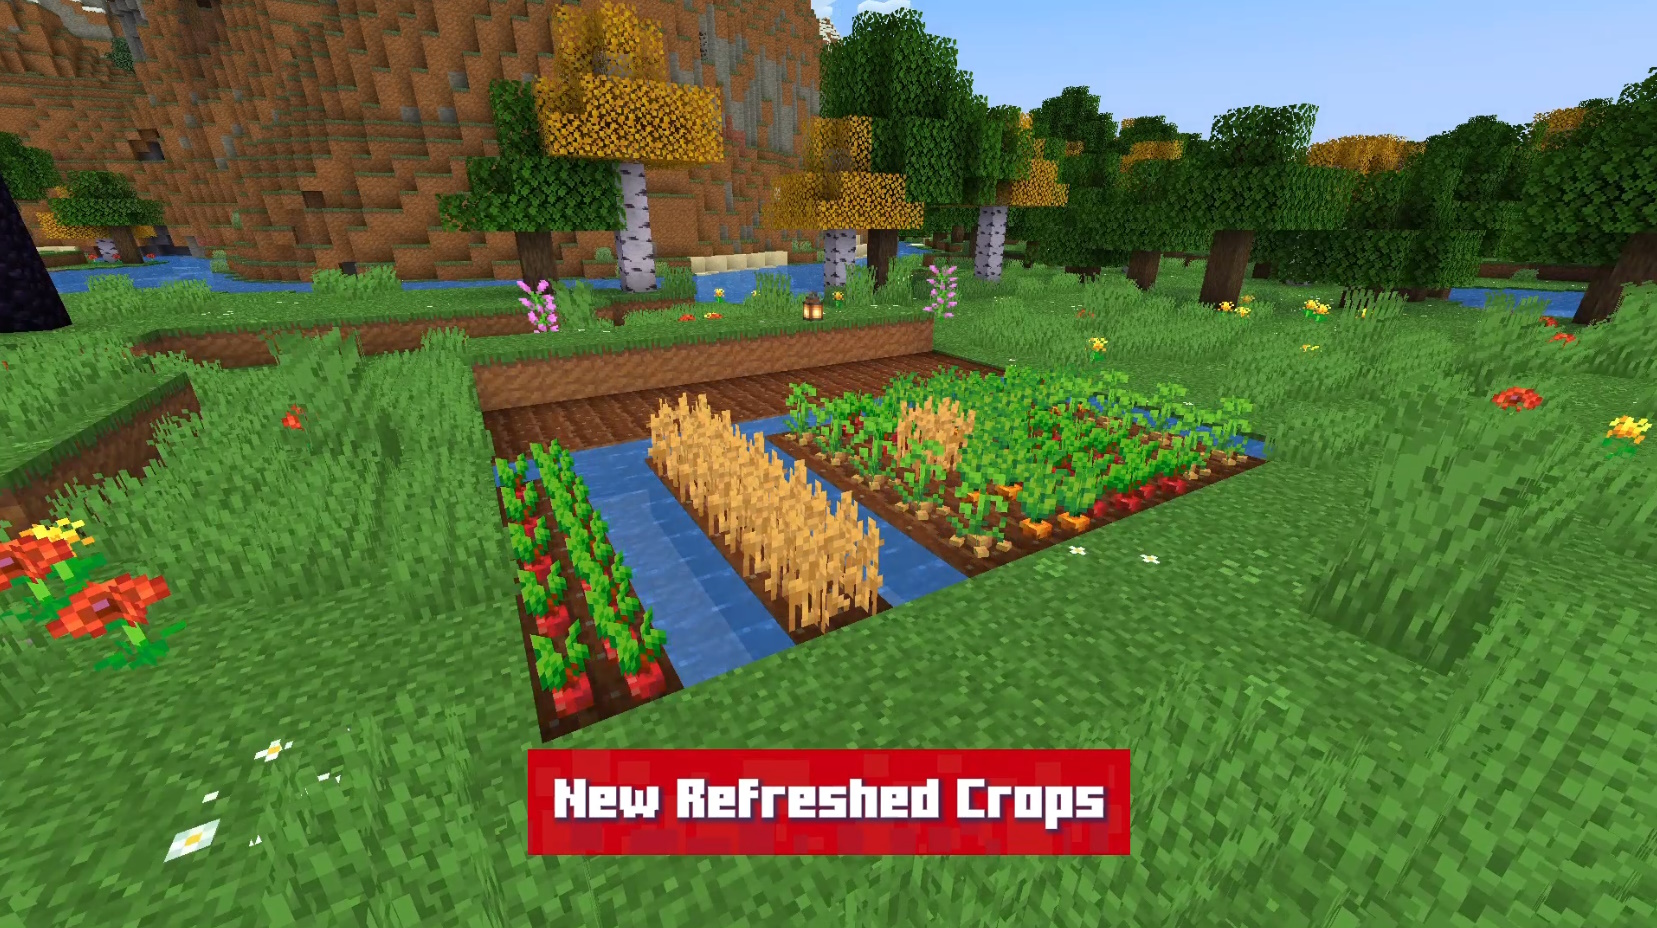 New Refreshed Crops